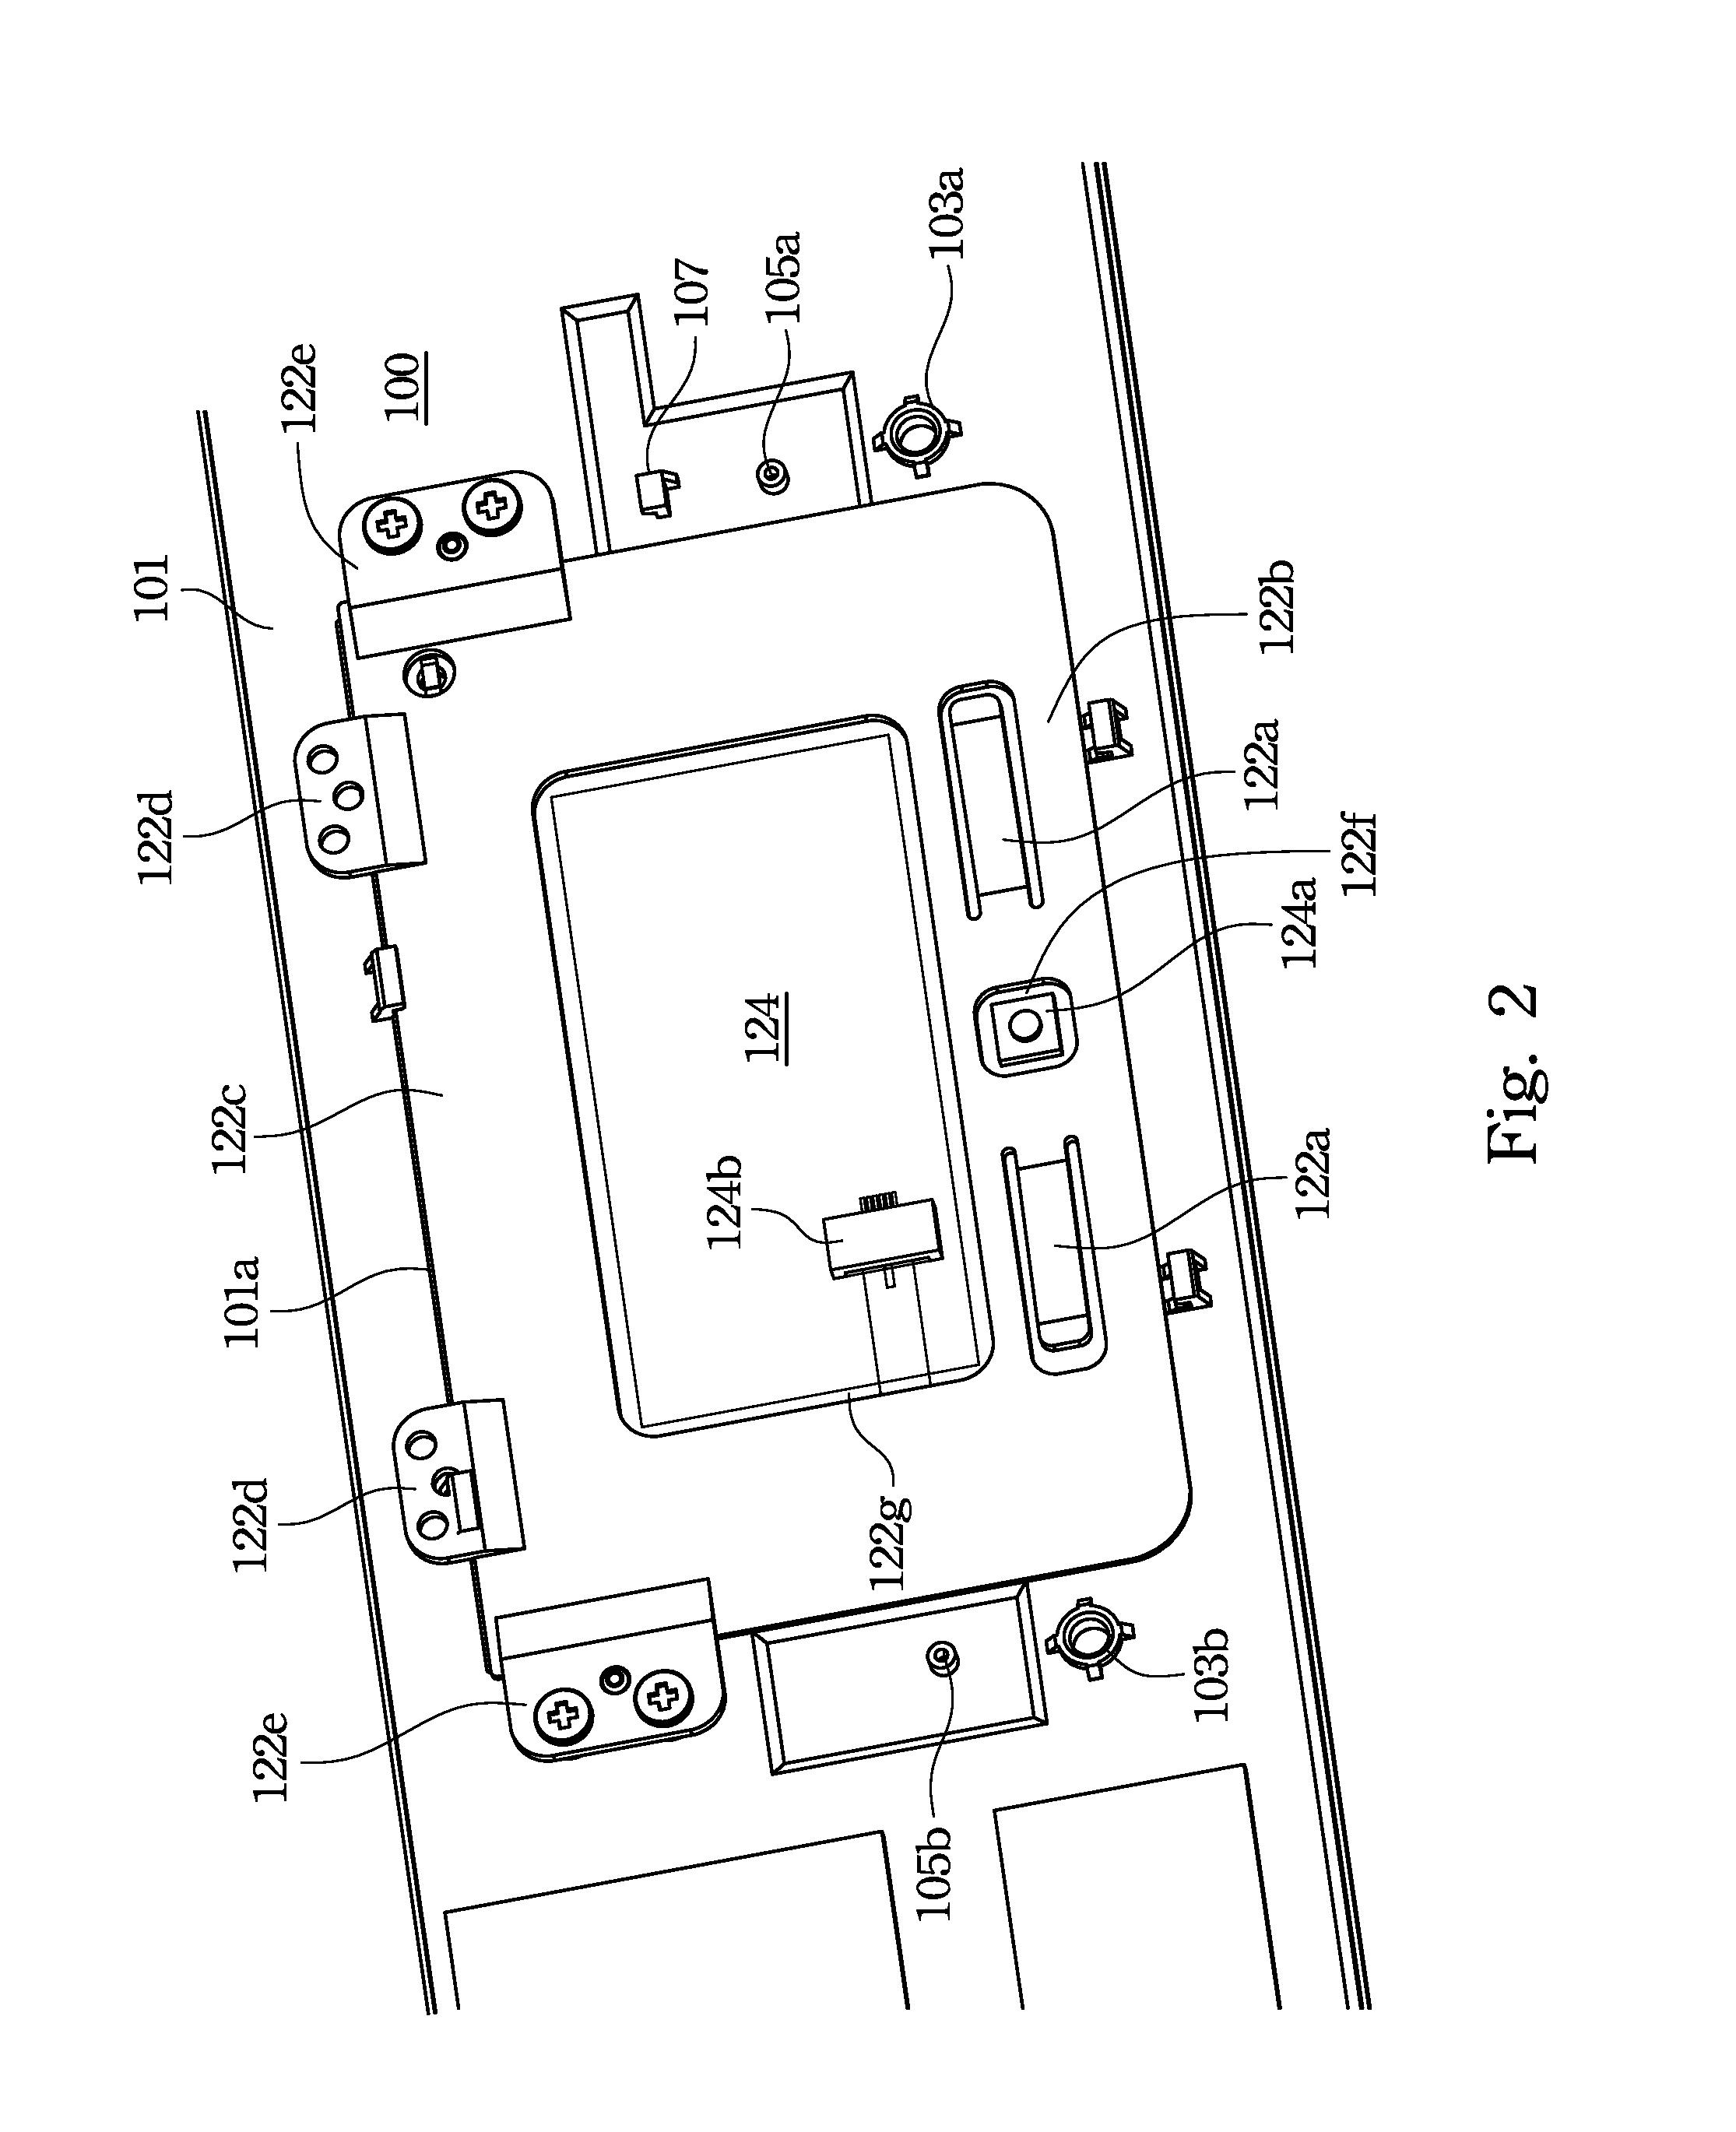 Touch pad module assembly structure